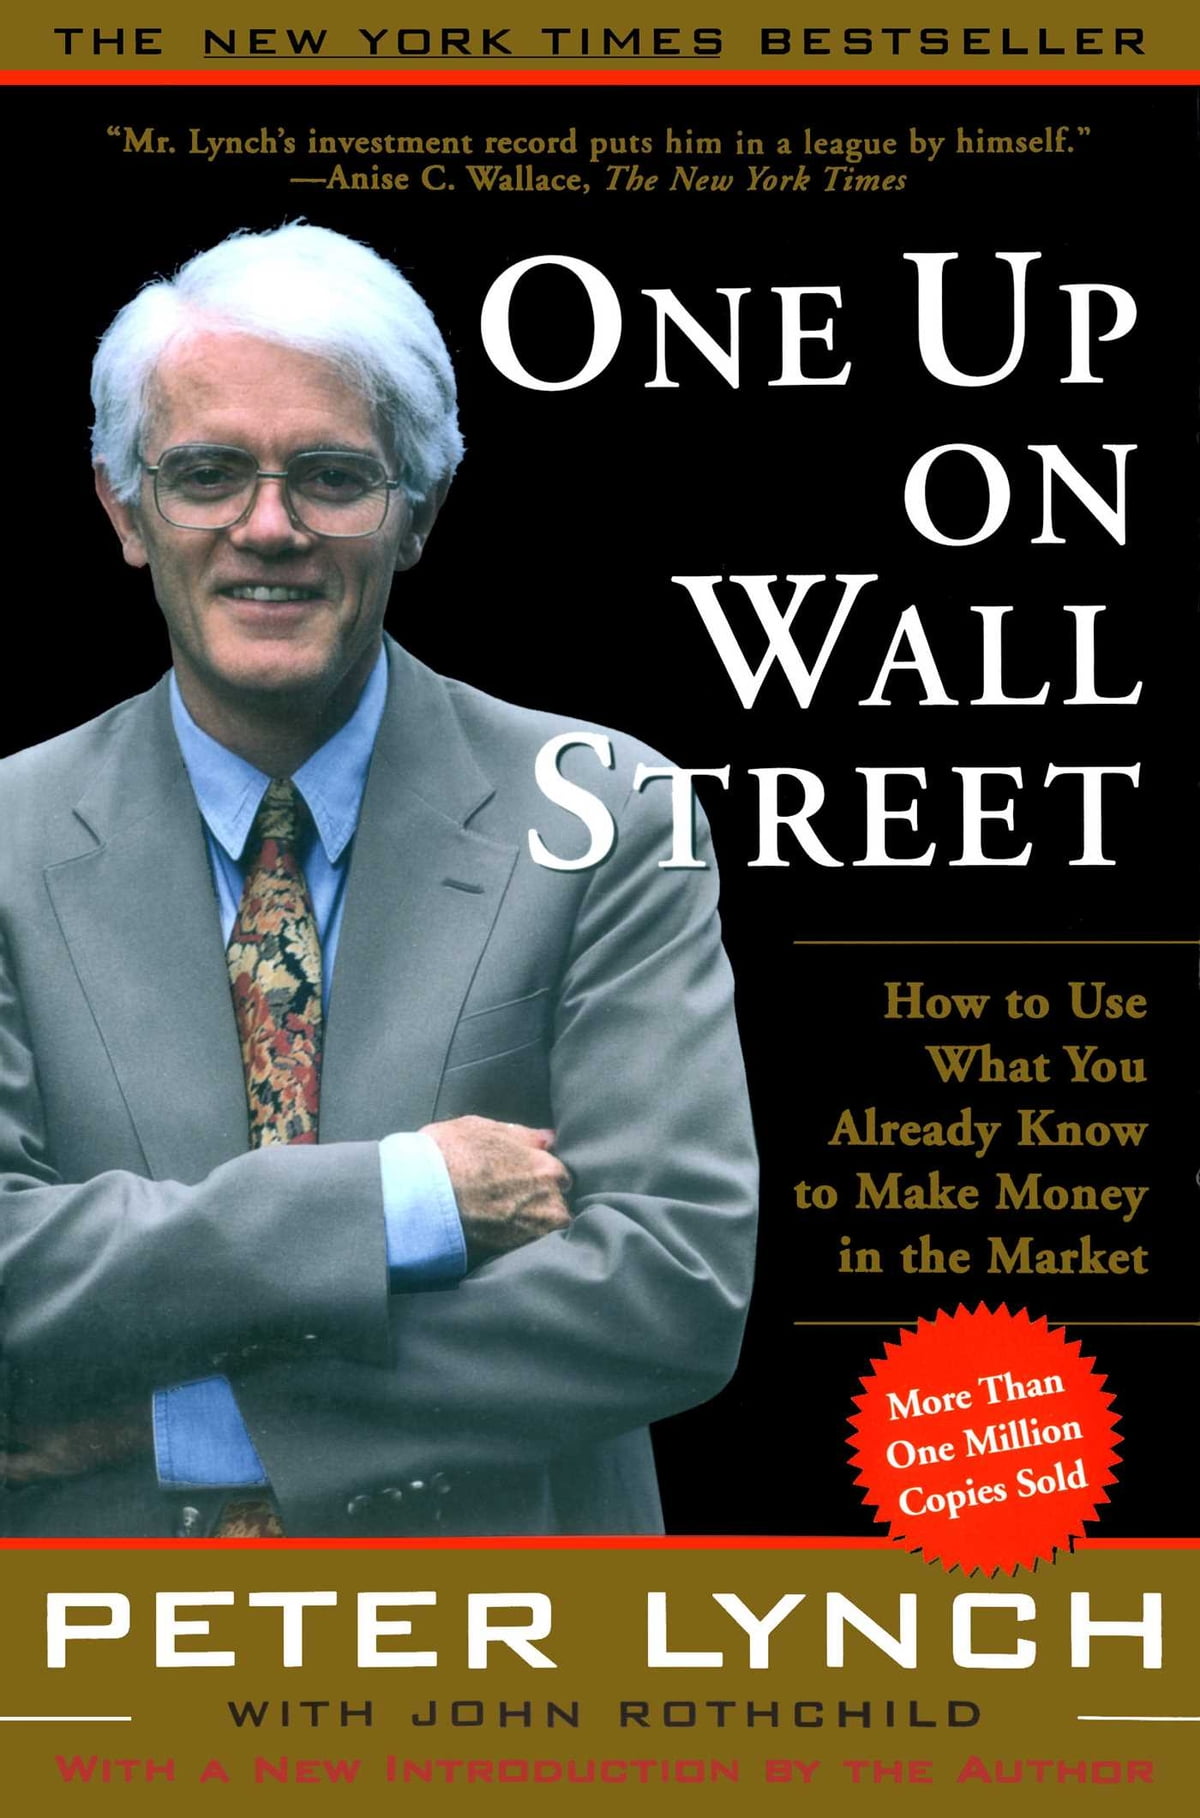 Image of the book: One up on wall street by Peter Lynch